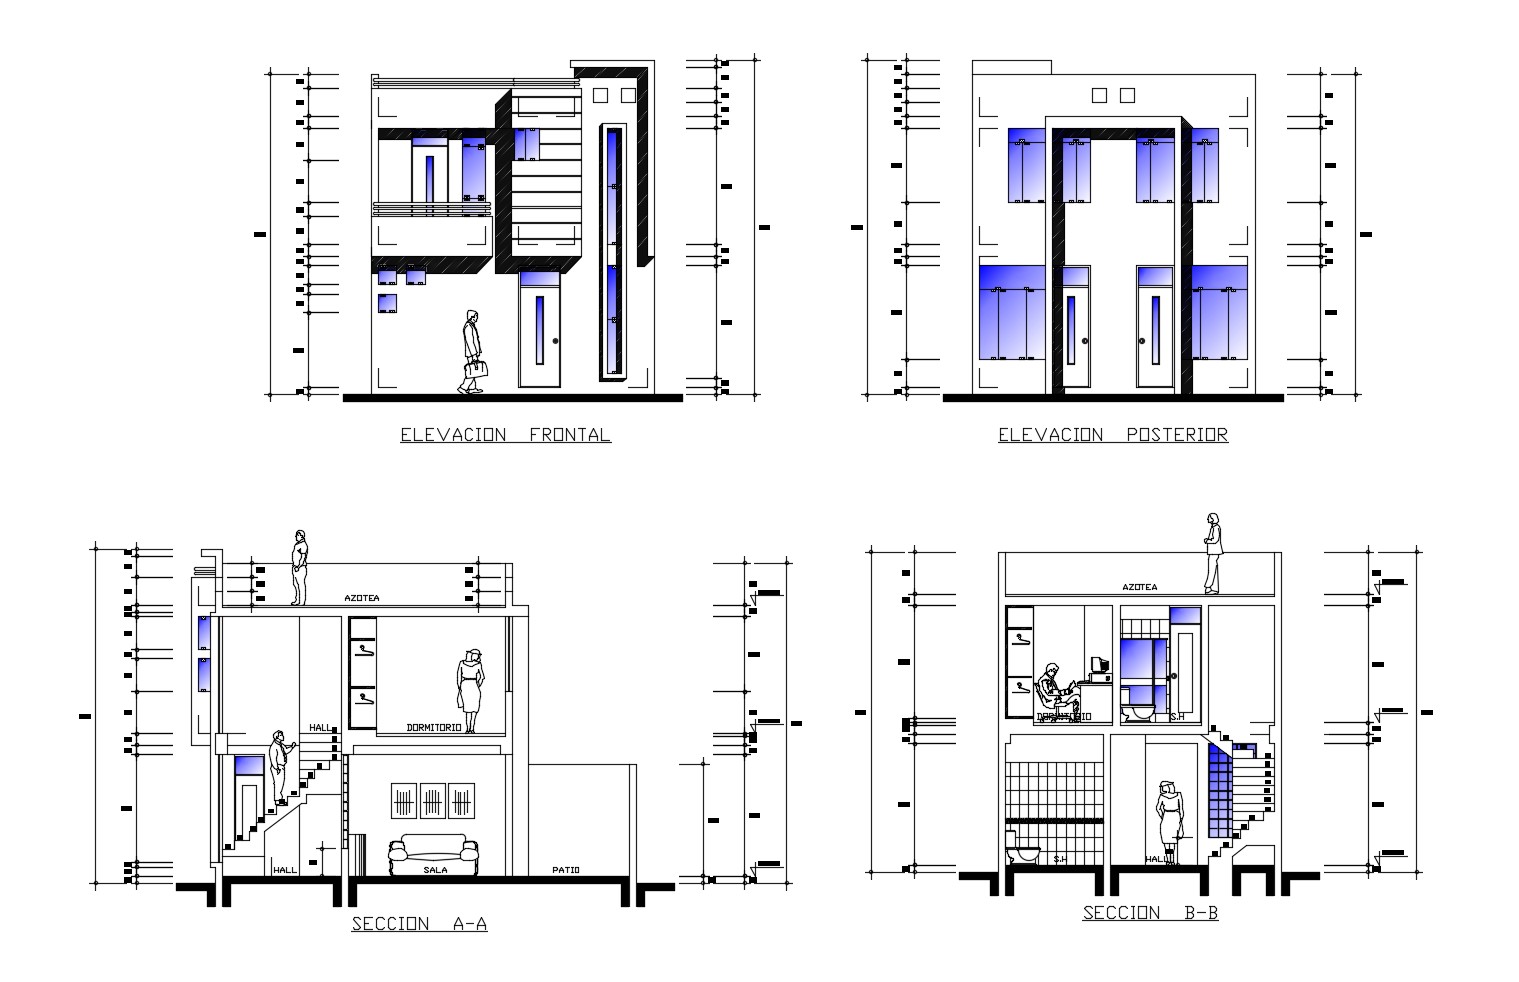 2 storey house design with elevation and section in dwg